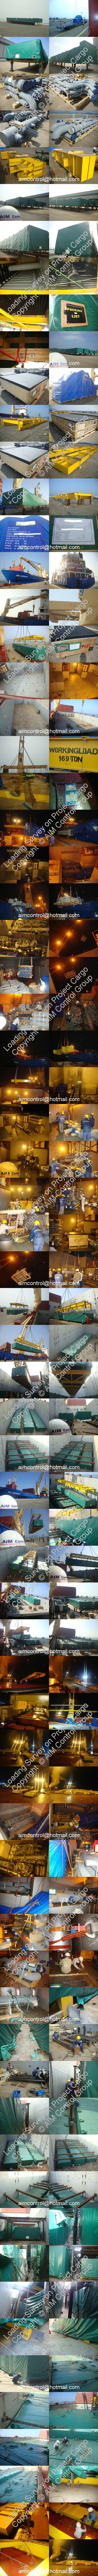 Heavy_Lift_Project_Cargo_Loading_Unloading_Supervision_Inspection_AIM_Control_experts